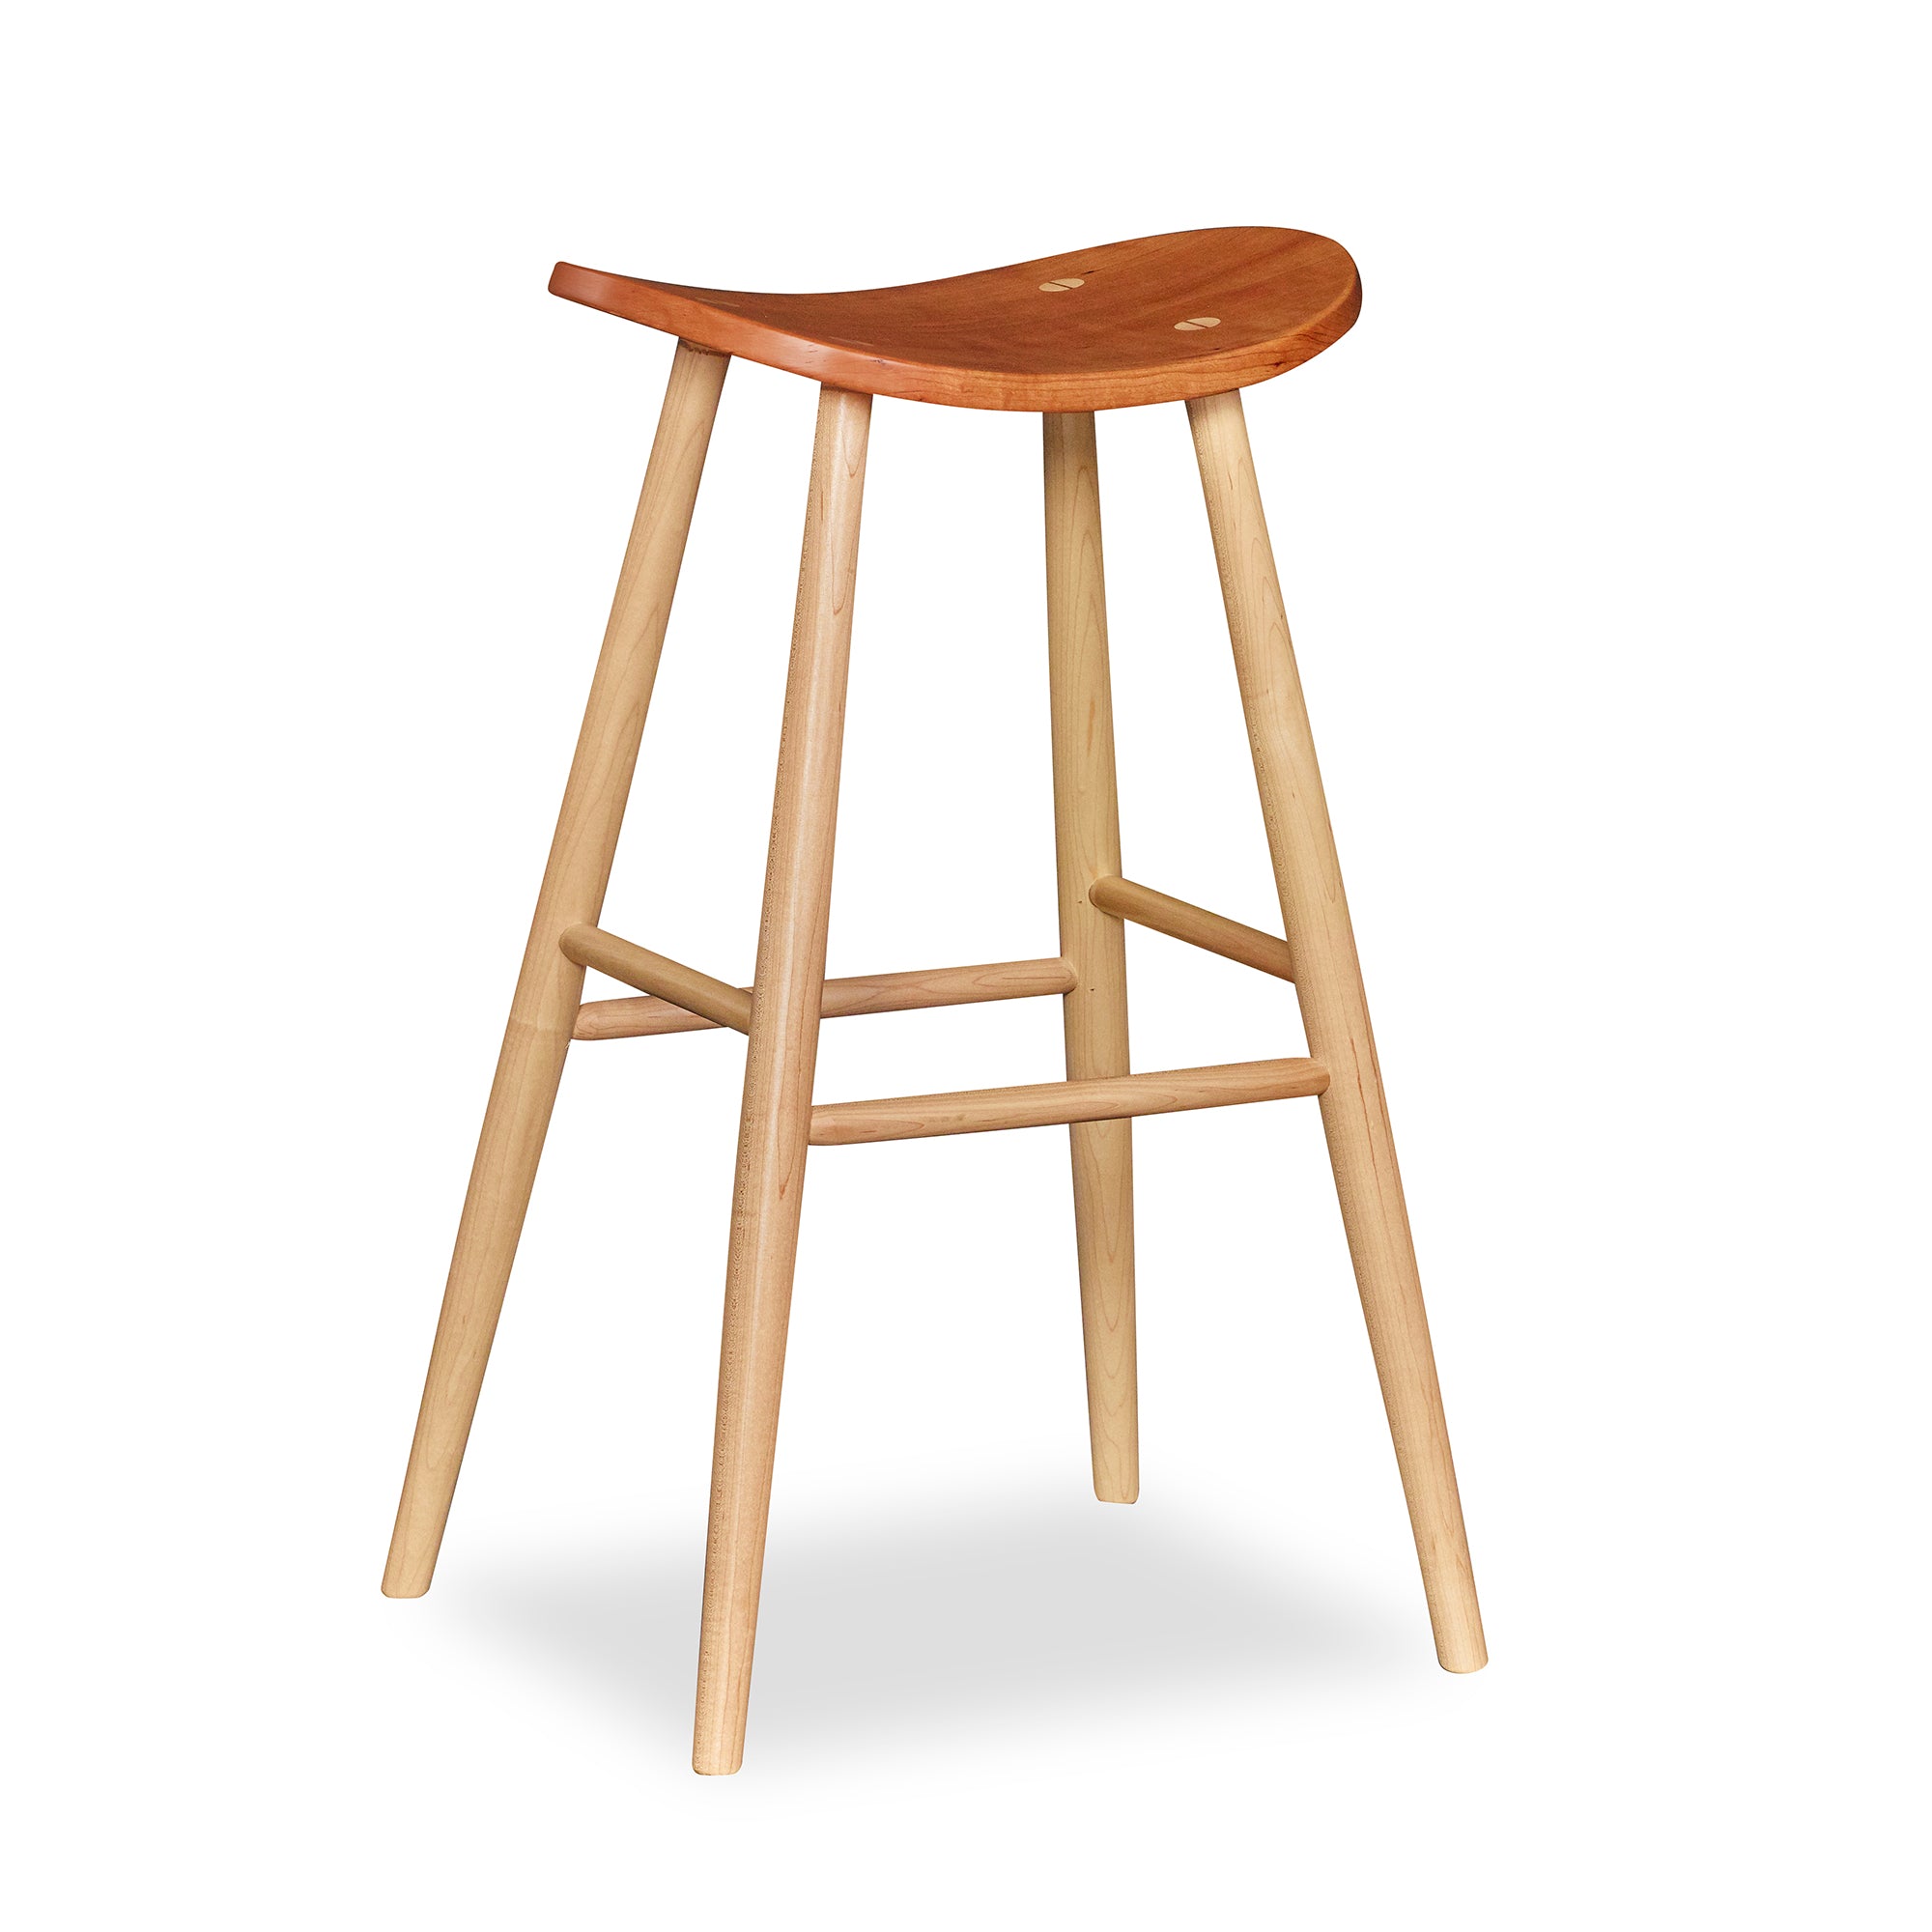 Cherry and maple bar stool with saddle seat